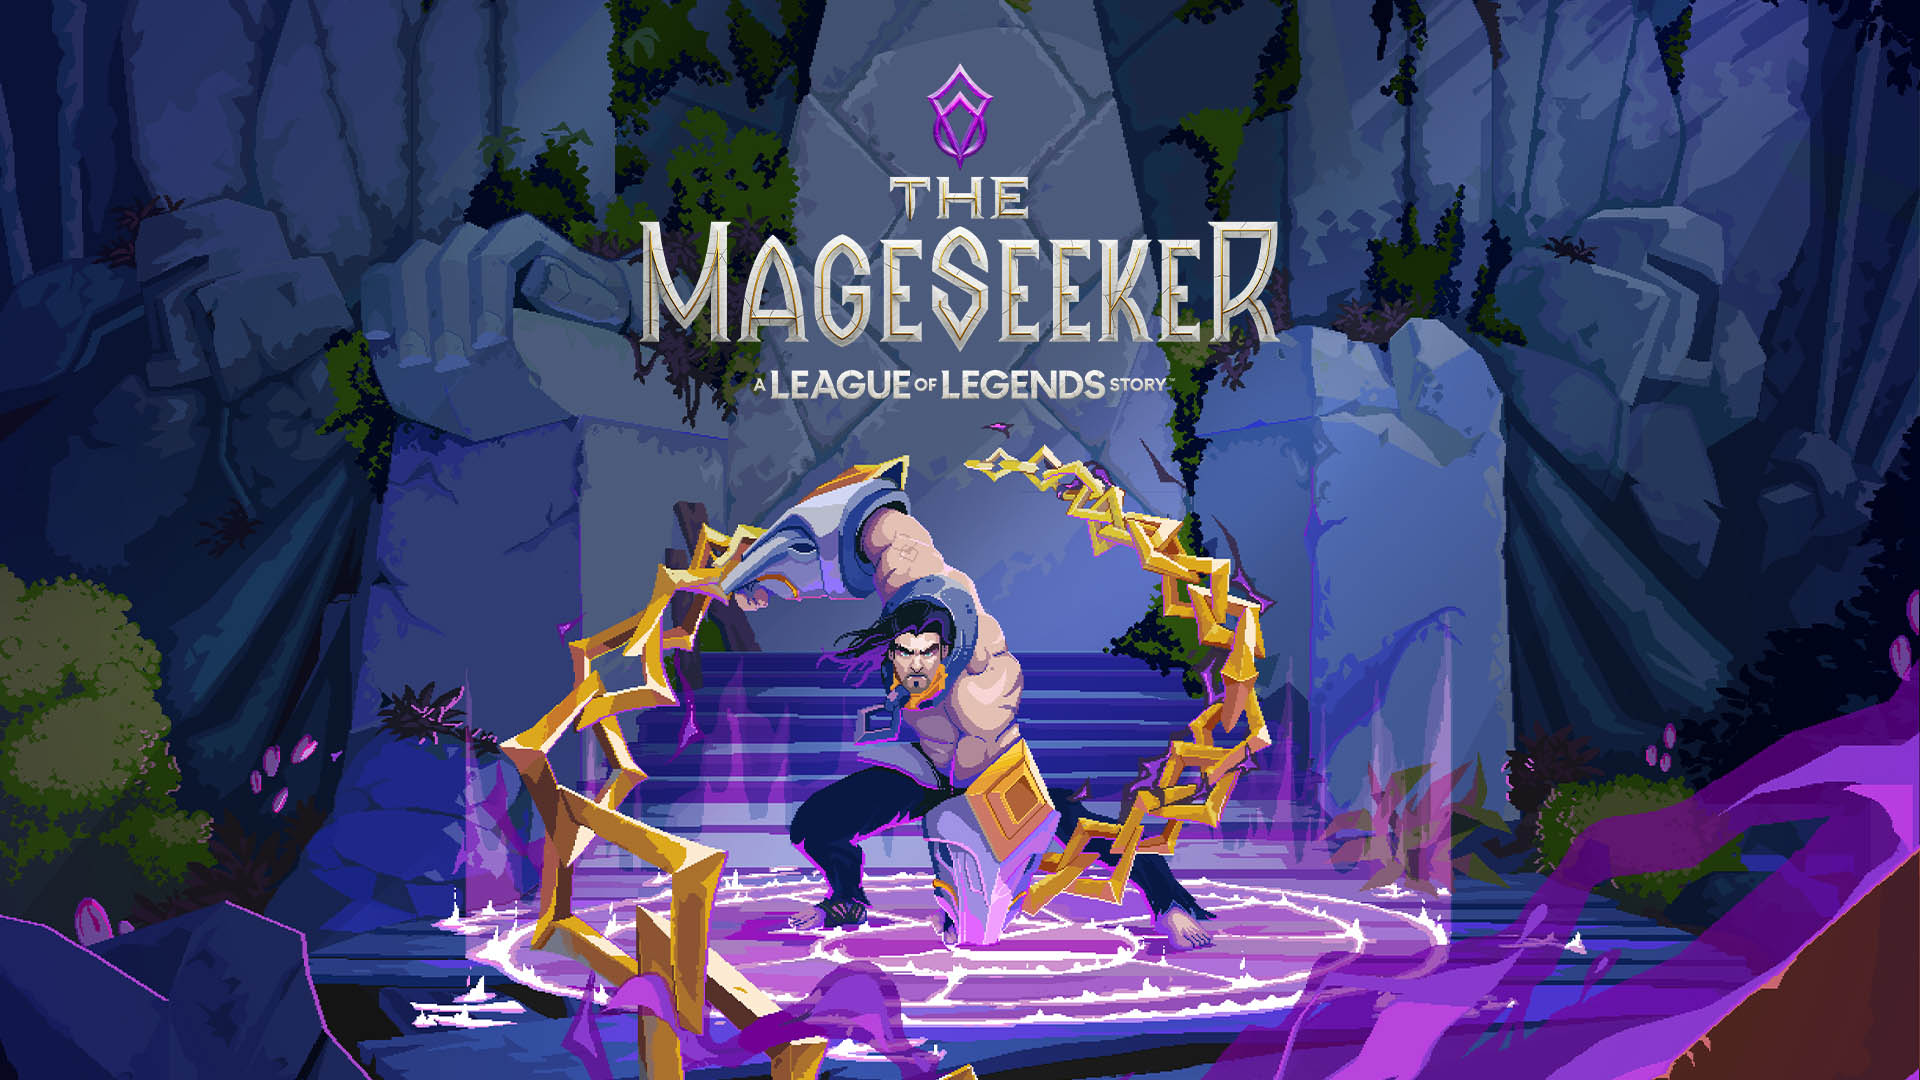 The Mageseeker: A League of Legends Story announced